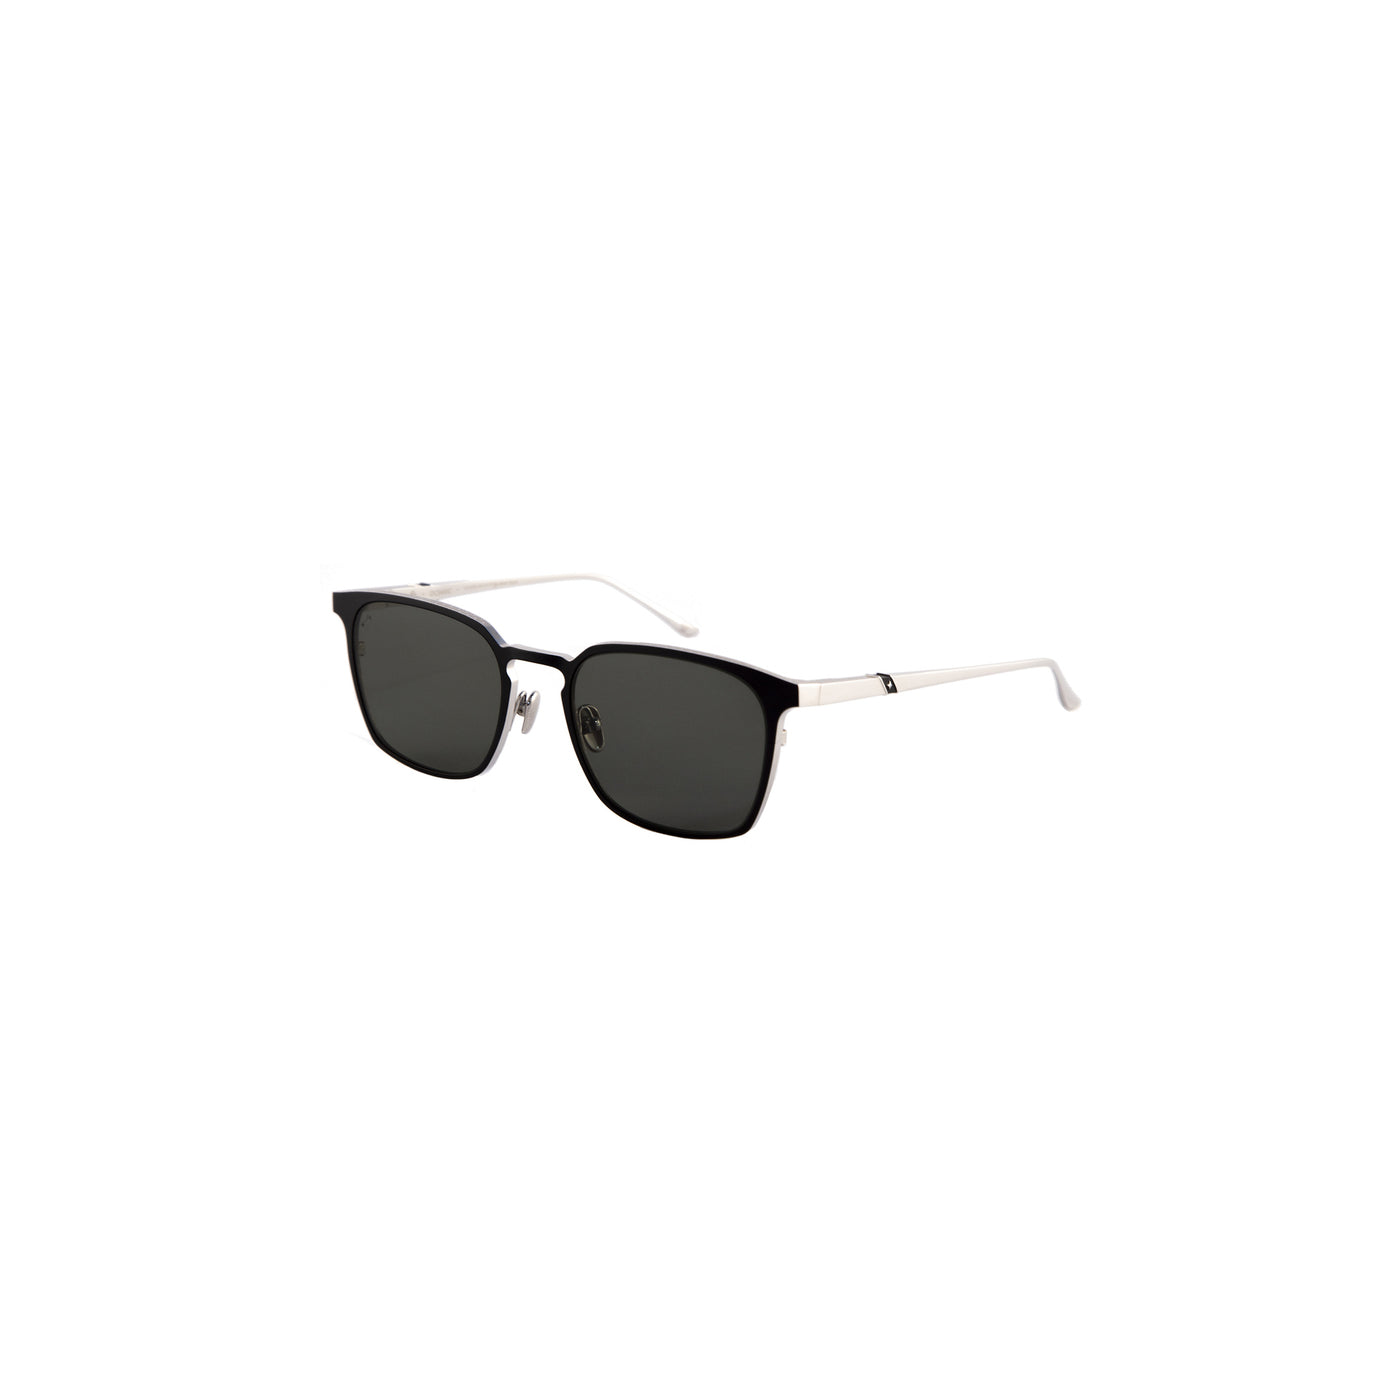 Oceanic 12K Silver and Black Sunglasses